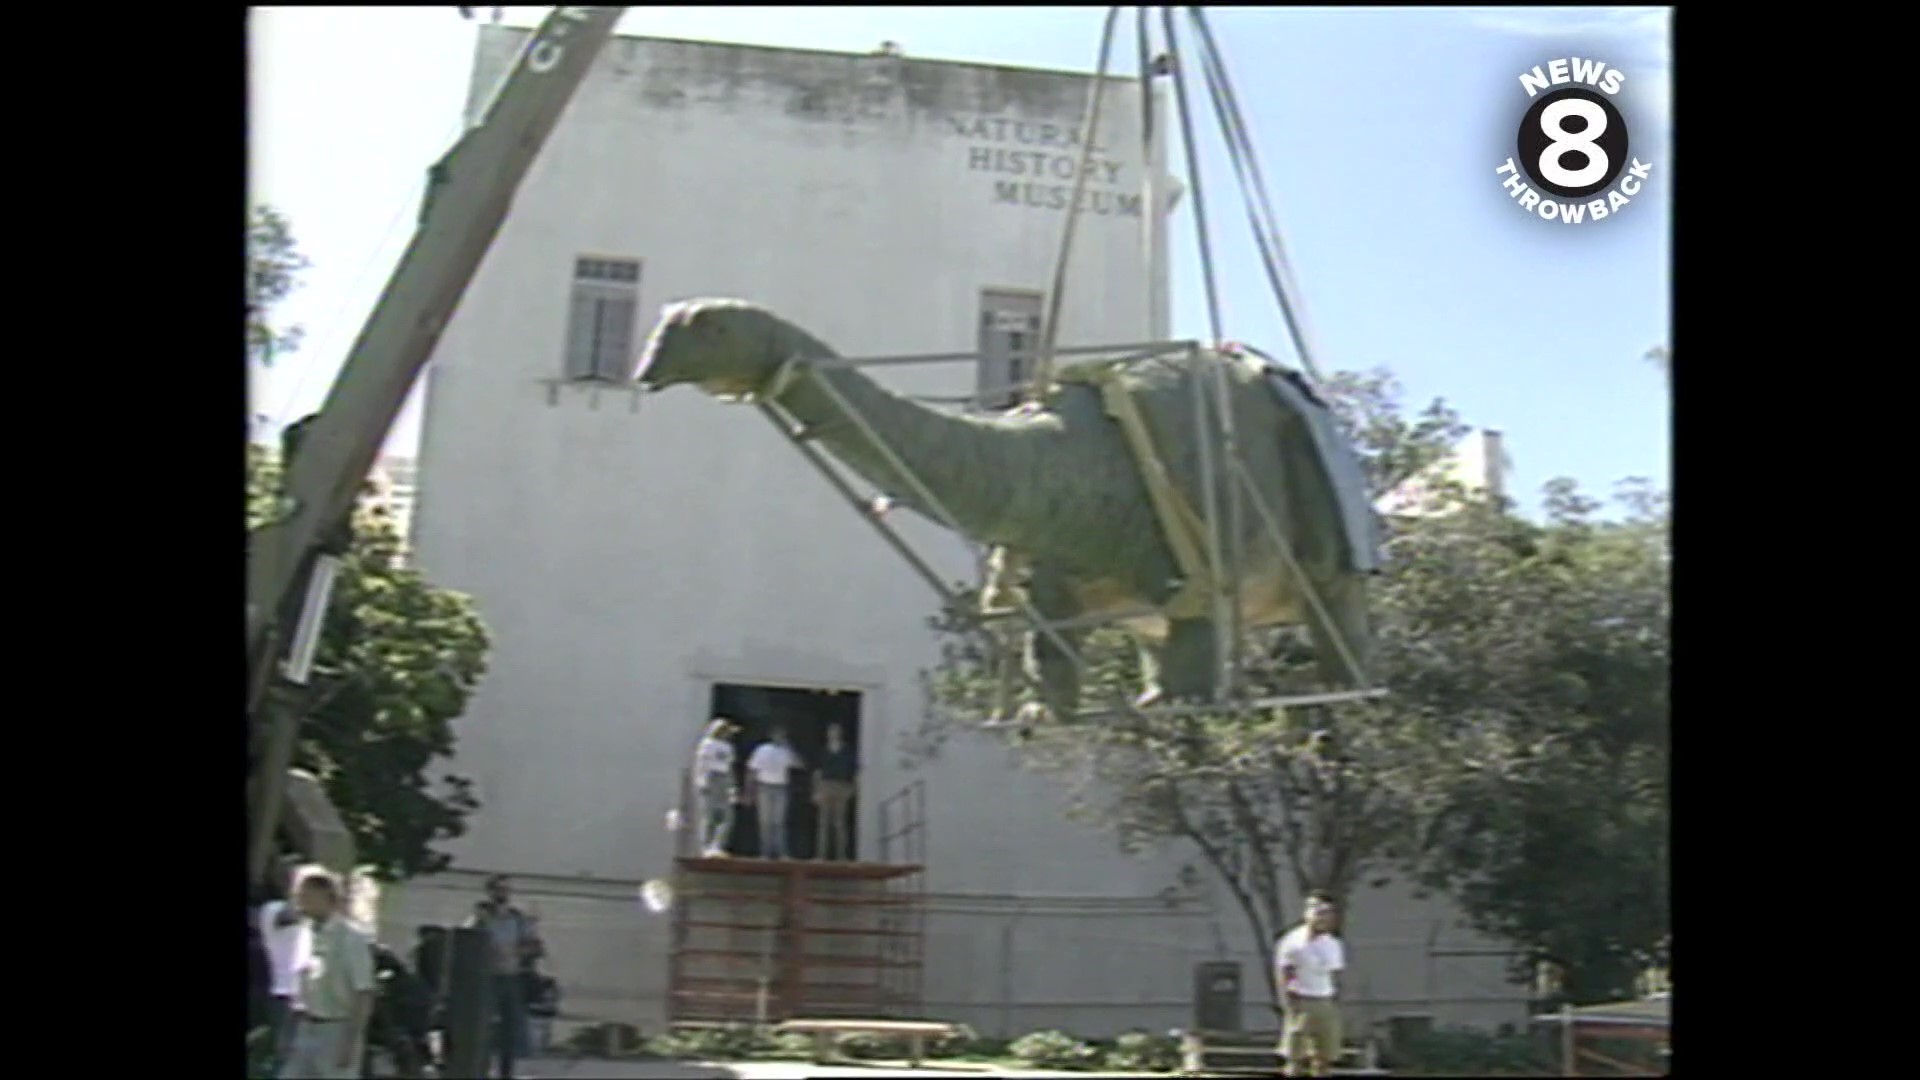 Dinos delivery--a spectacular sight in San Diego in 1986